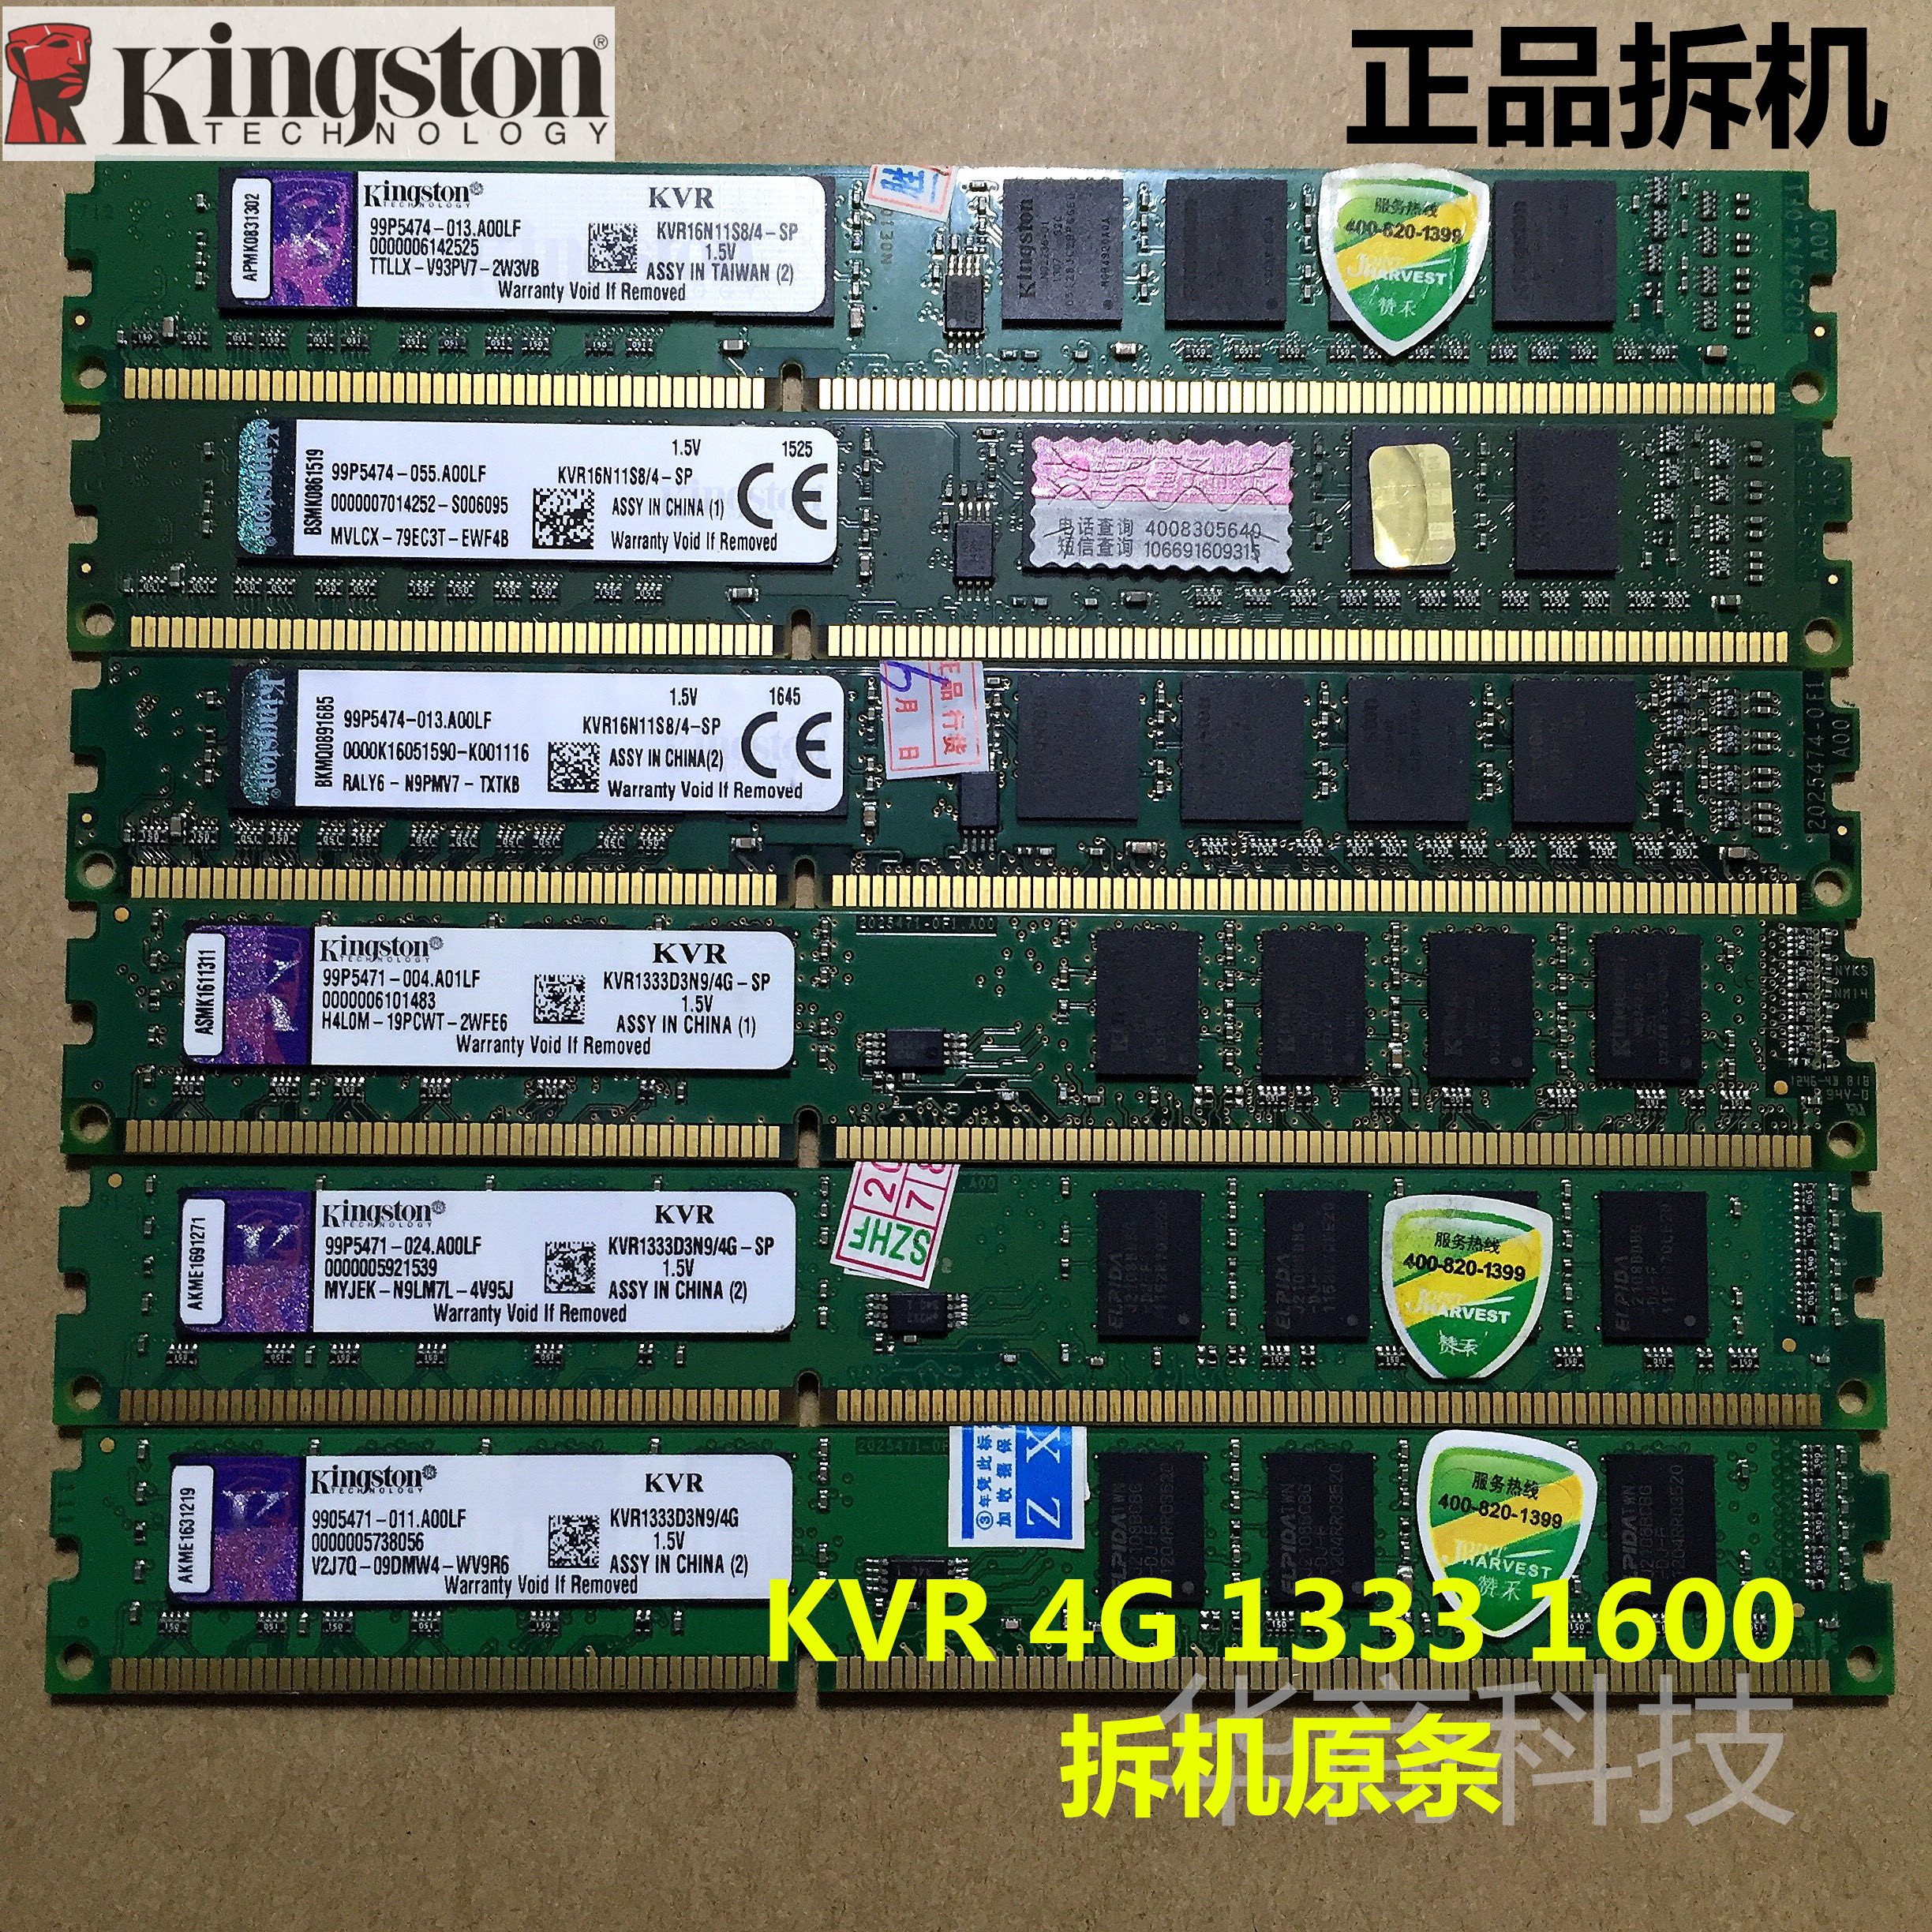 Kingston / Kingston 4G DDR3 1333 1600 desktop memory module fully compatible with the third generation 2g1333